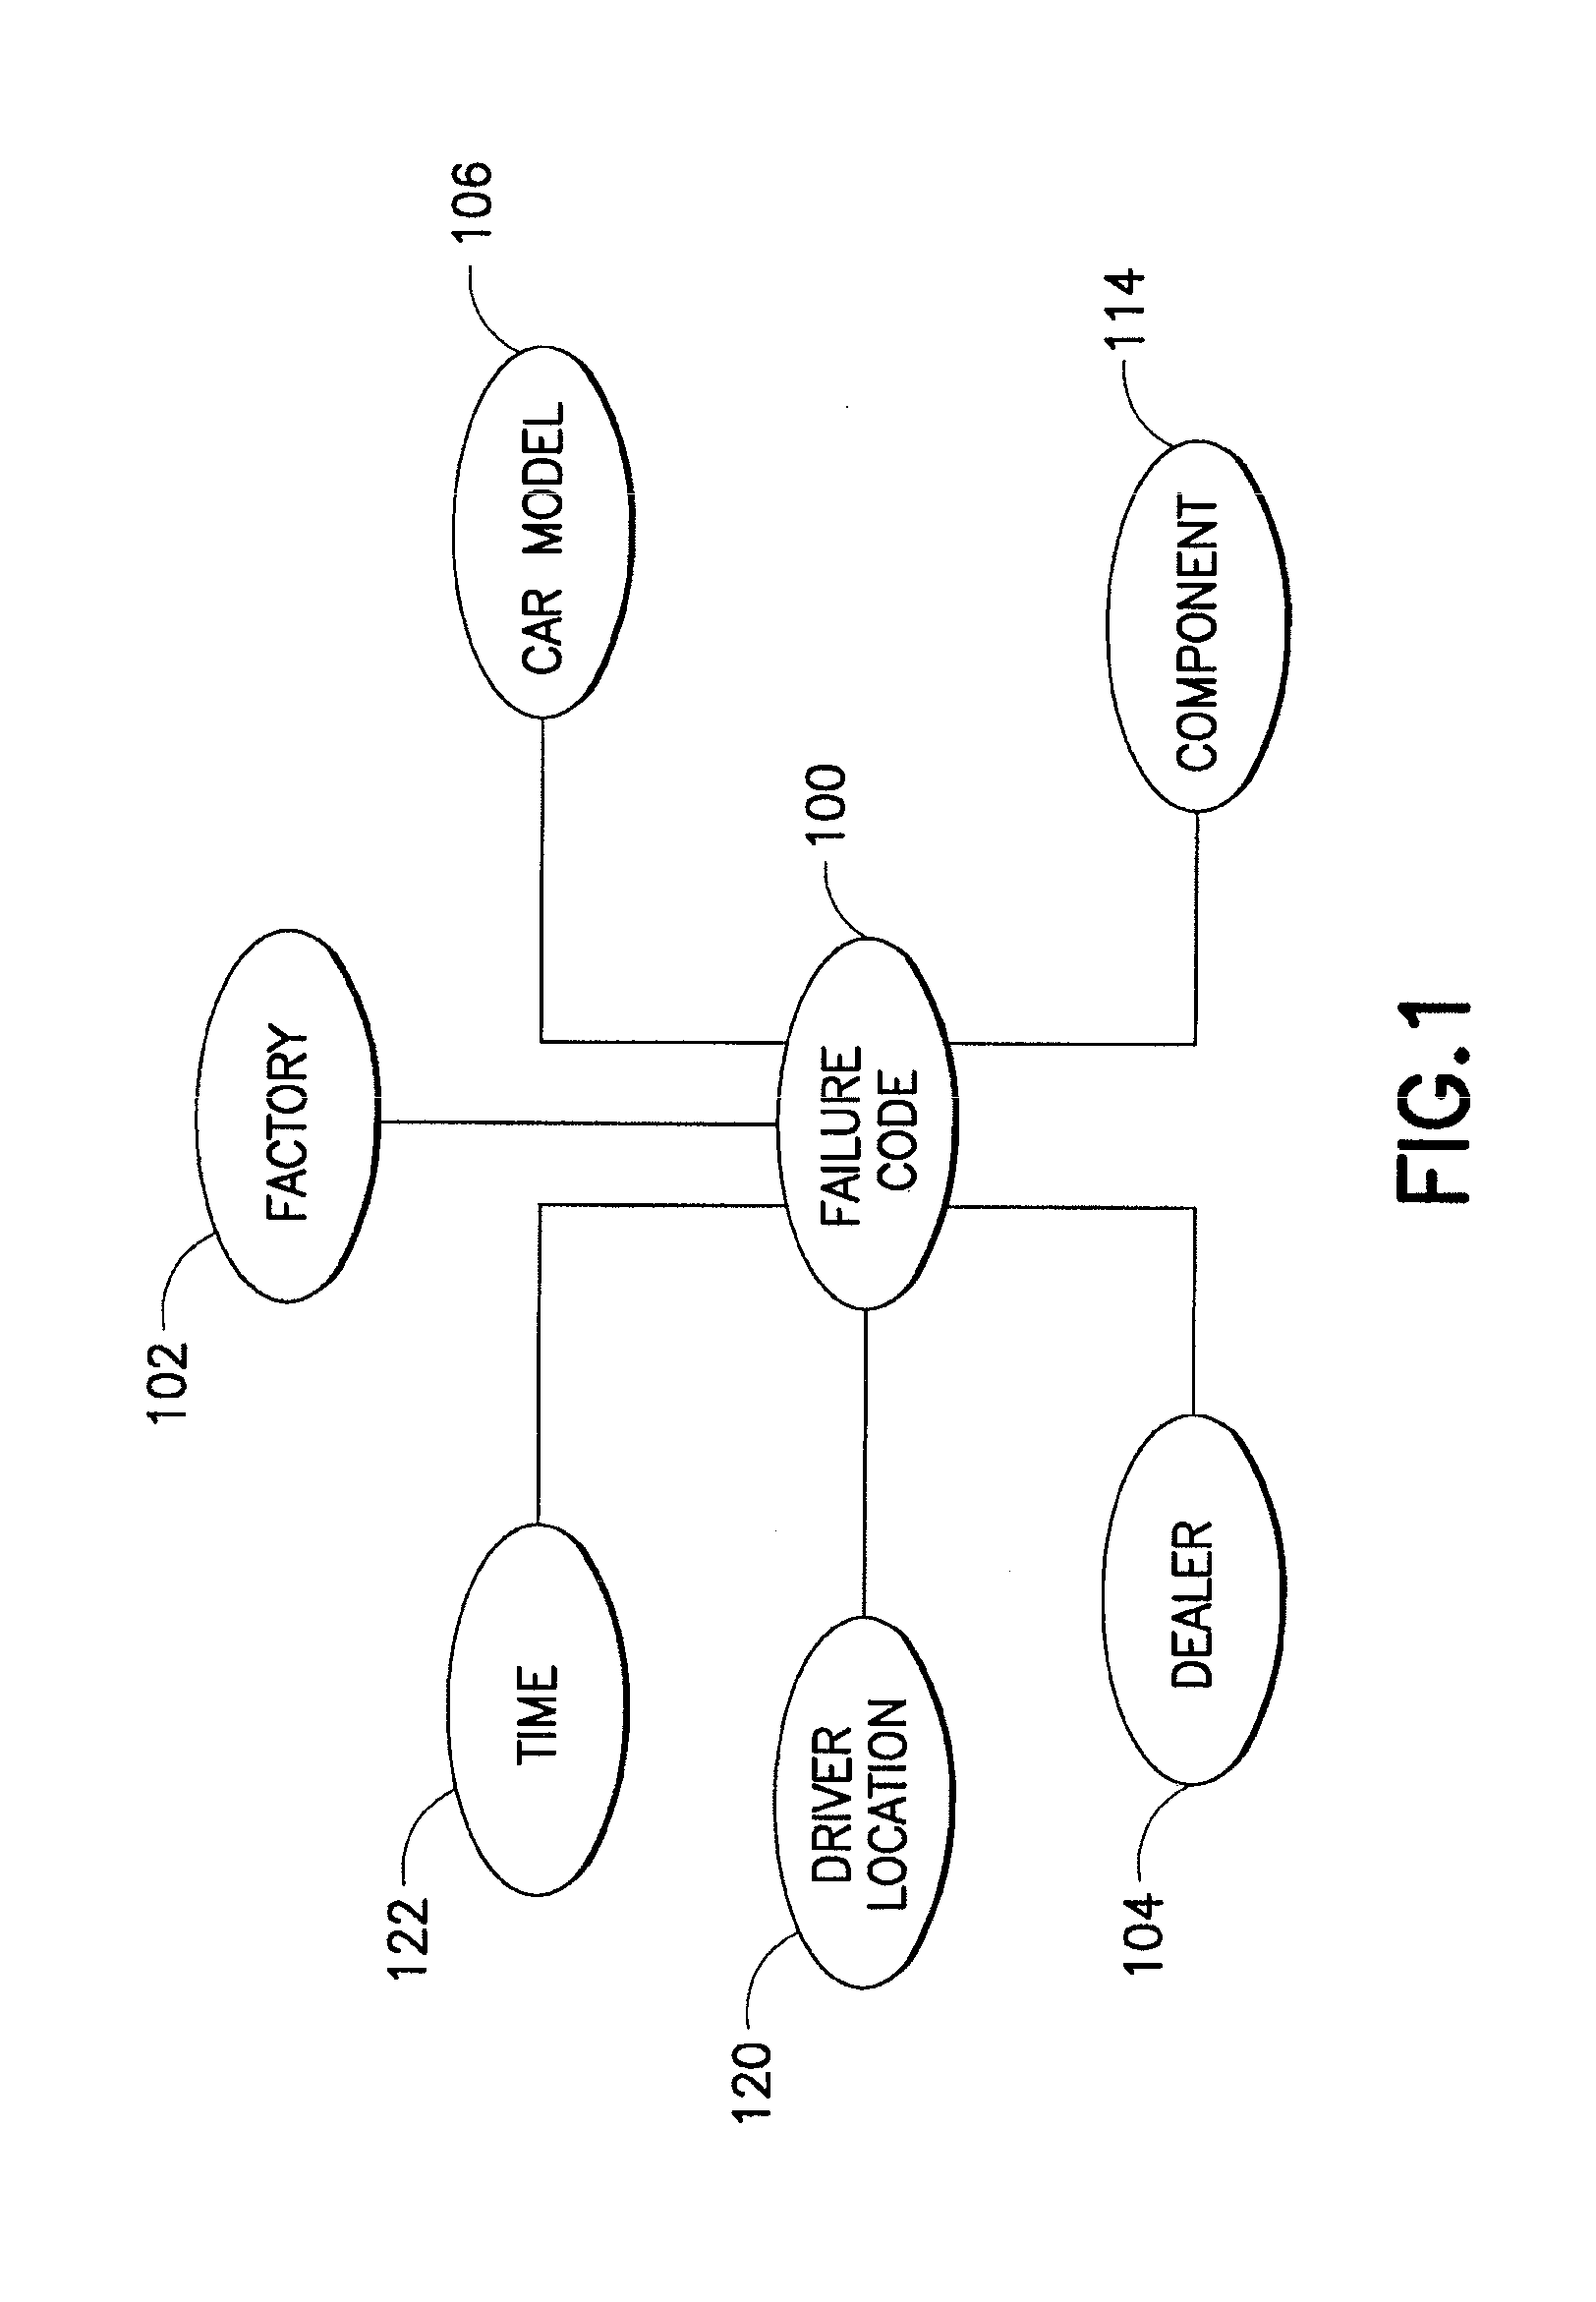 System and Method for Planning and Generating Queries for Multi-Dimensional Analysis using Domain Models and Data Federation